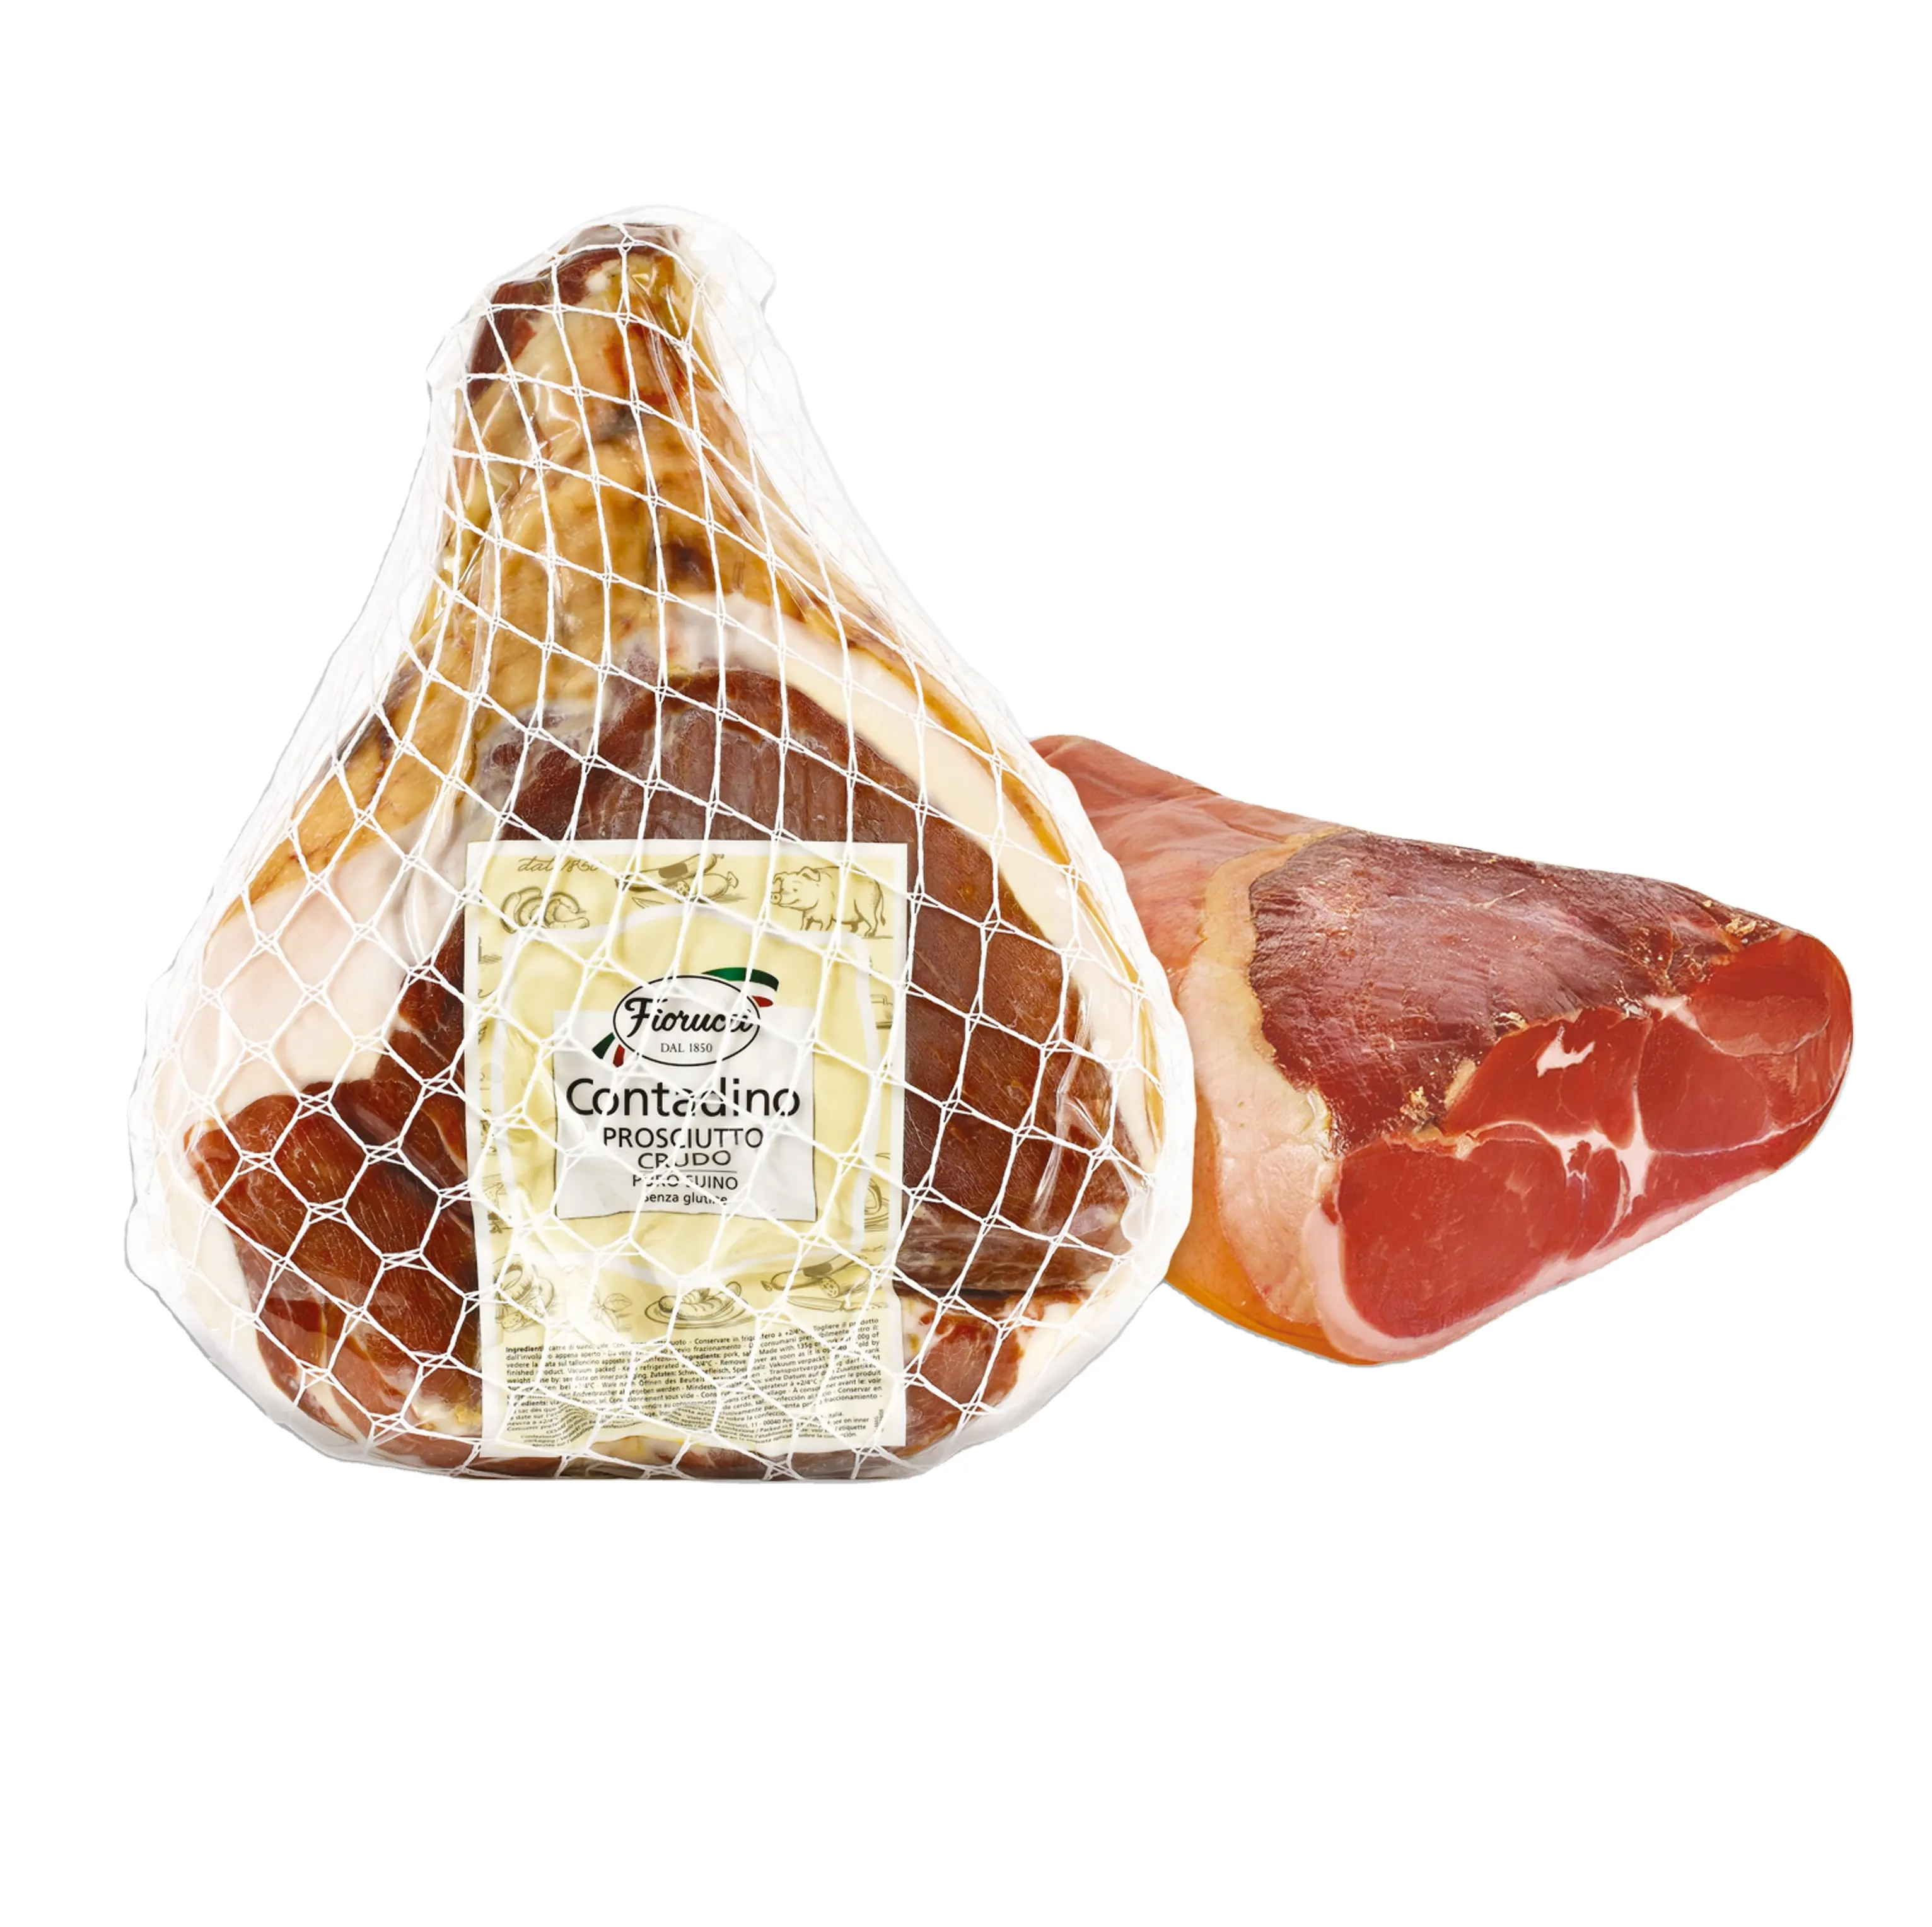 Made in Italy Top Quality dry cured ham Contadino Seasoned 9 months Deboned pork prosciutto crudo for horeca and distribution